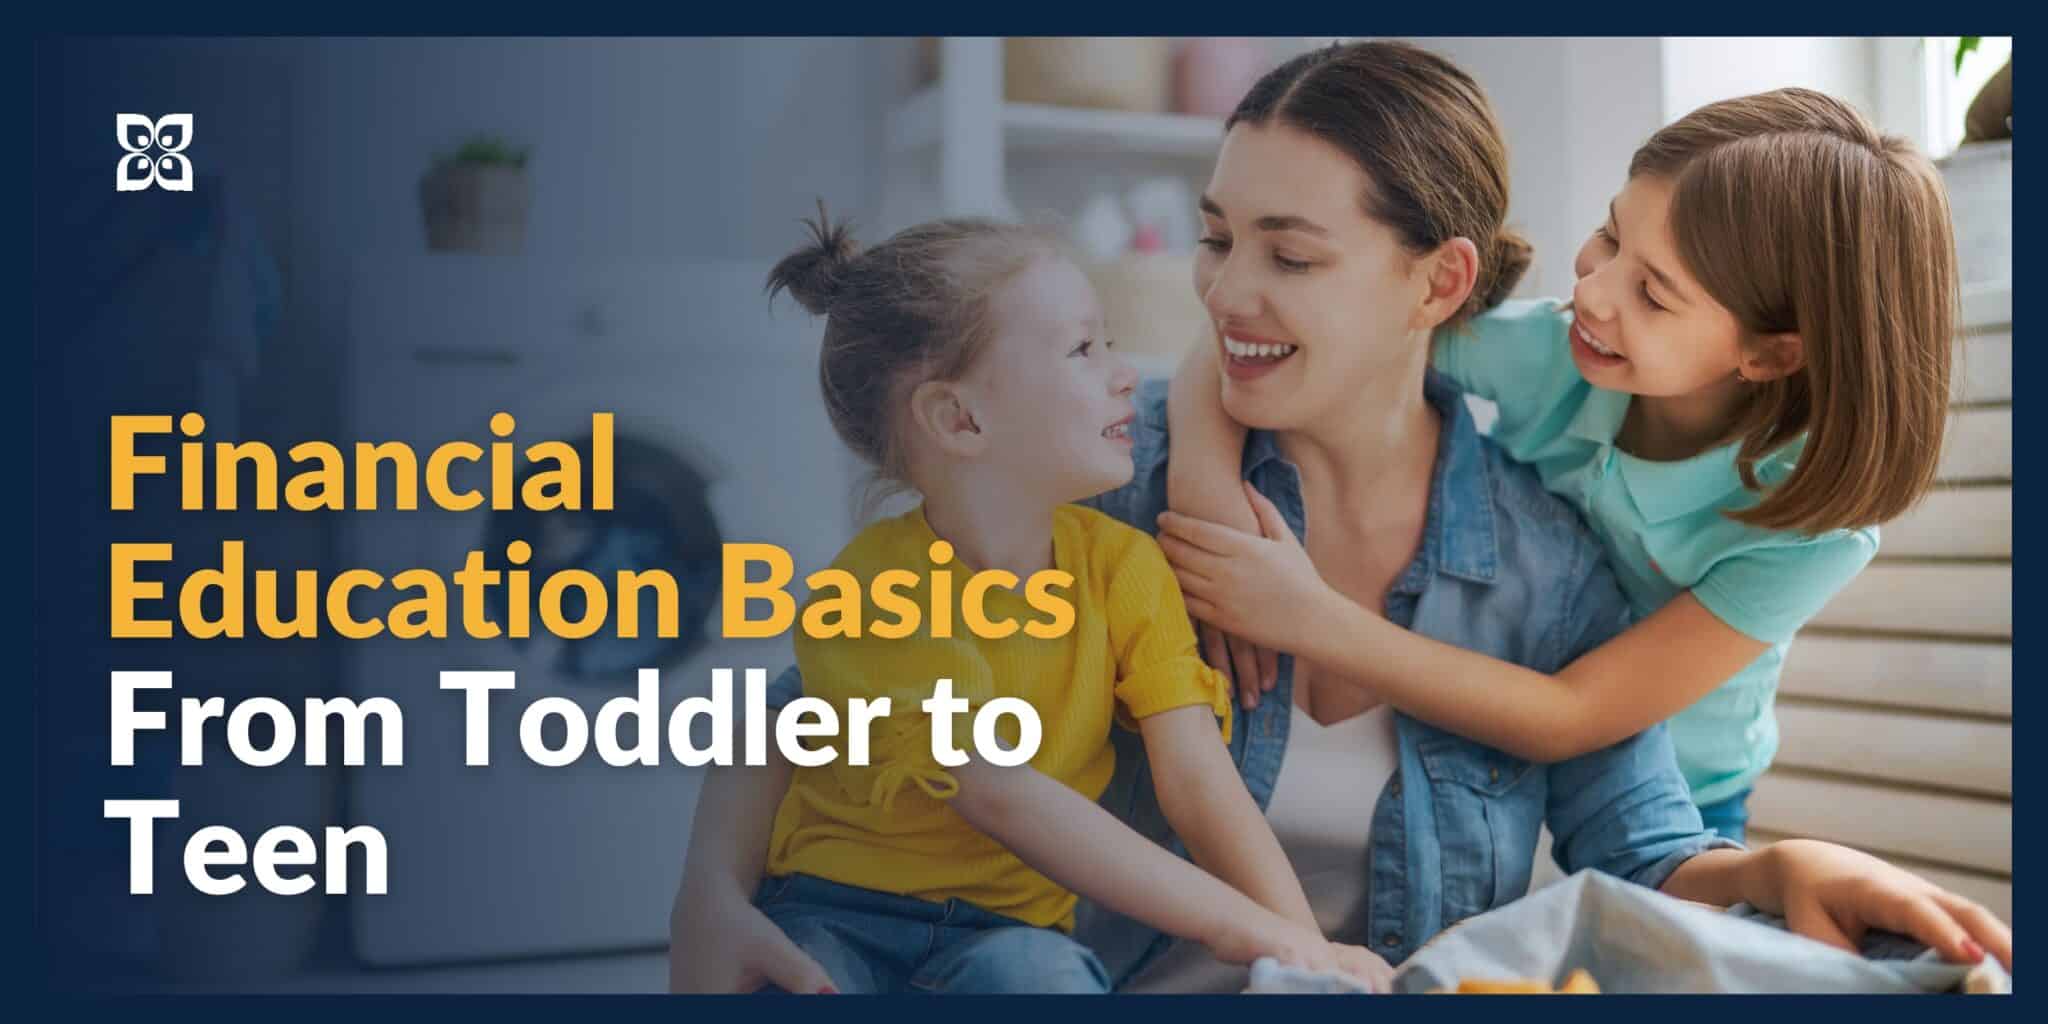 Teach Your Children Well: Basic Financial Education to Help Lead into Adulthood